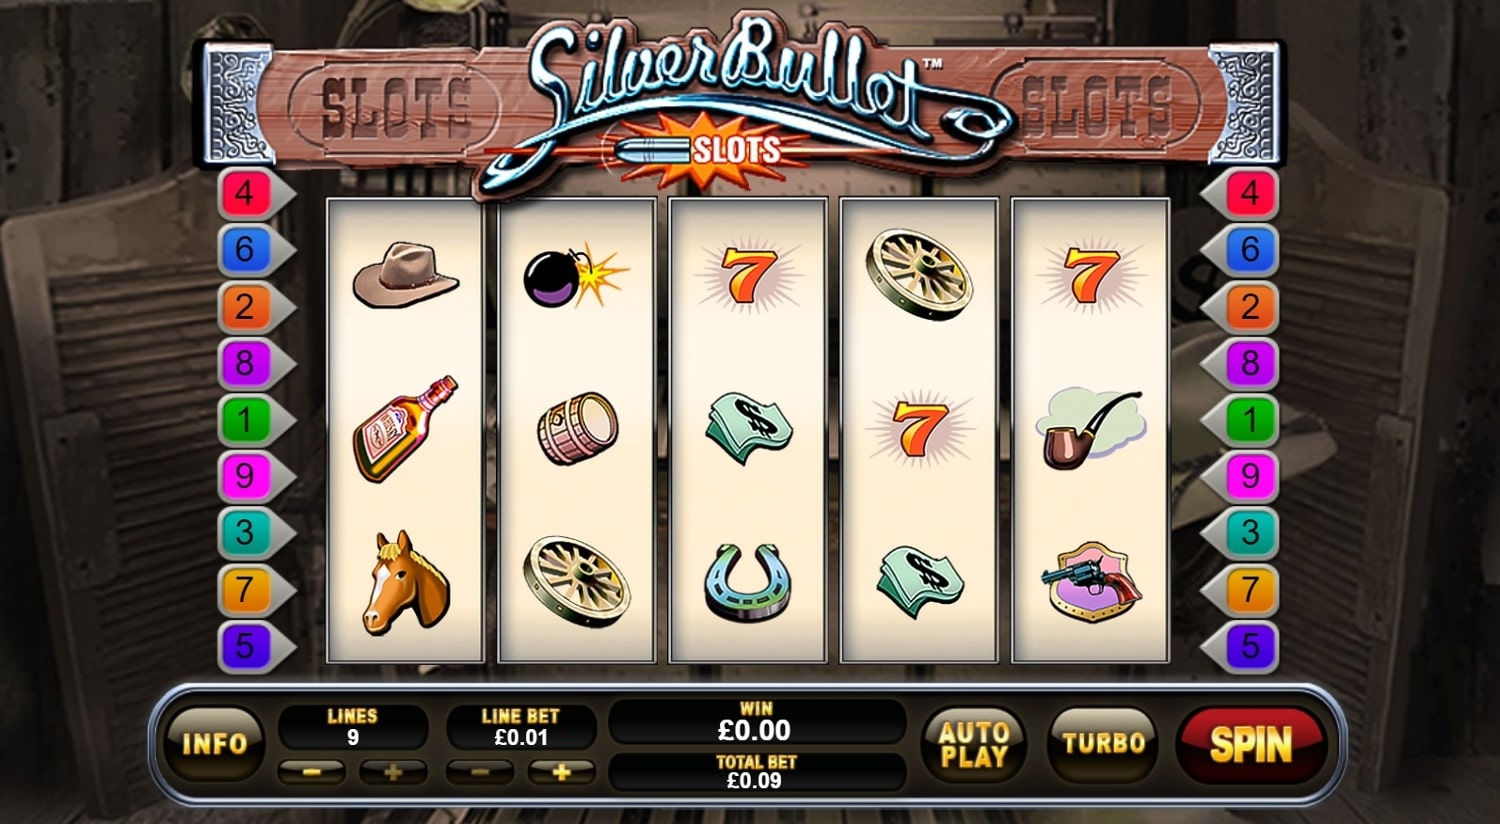 Silver Bullet Free Spins